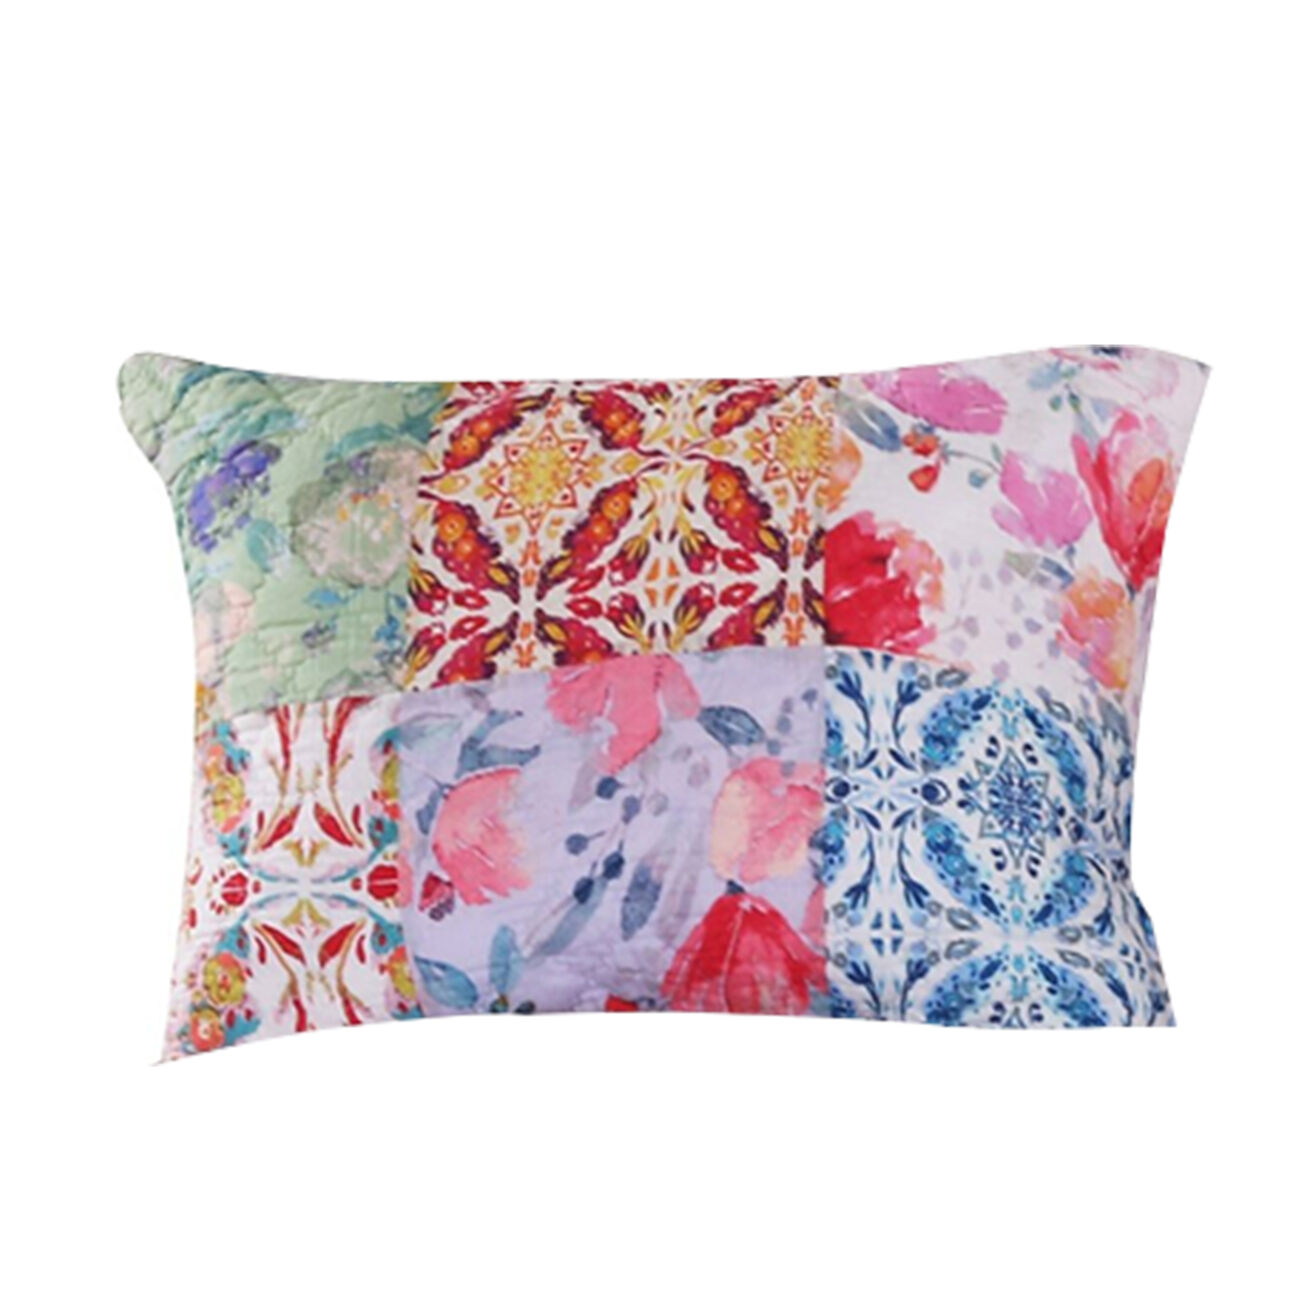 Hand Painted Fabric King Size Pillow Sham with Floral Tile Art, Multicolor